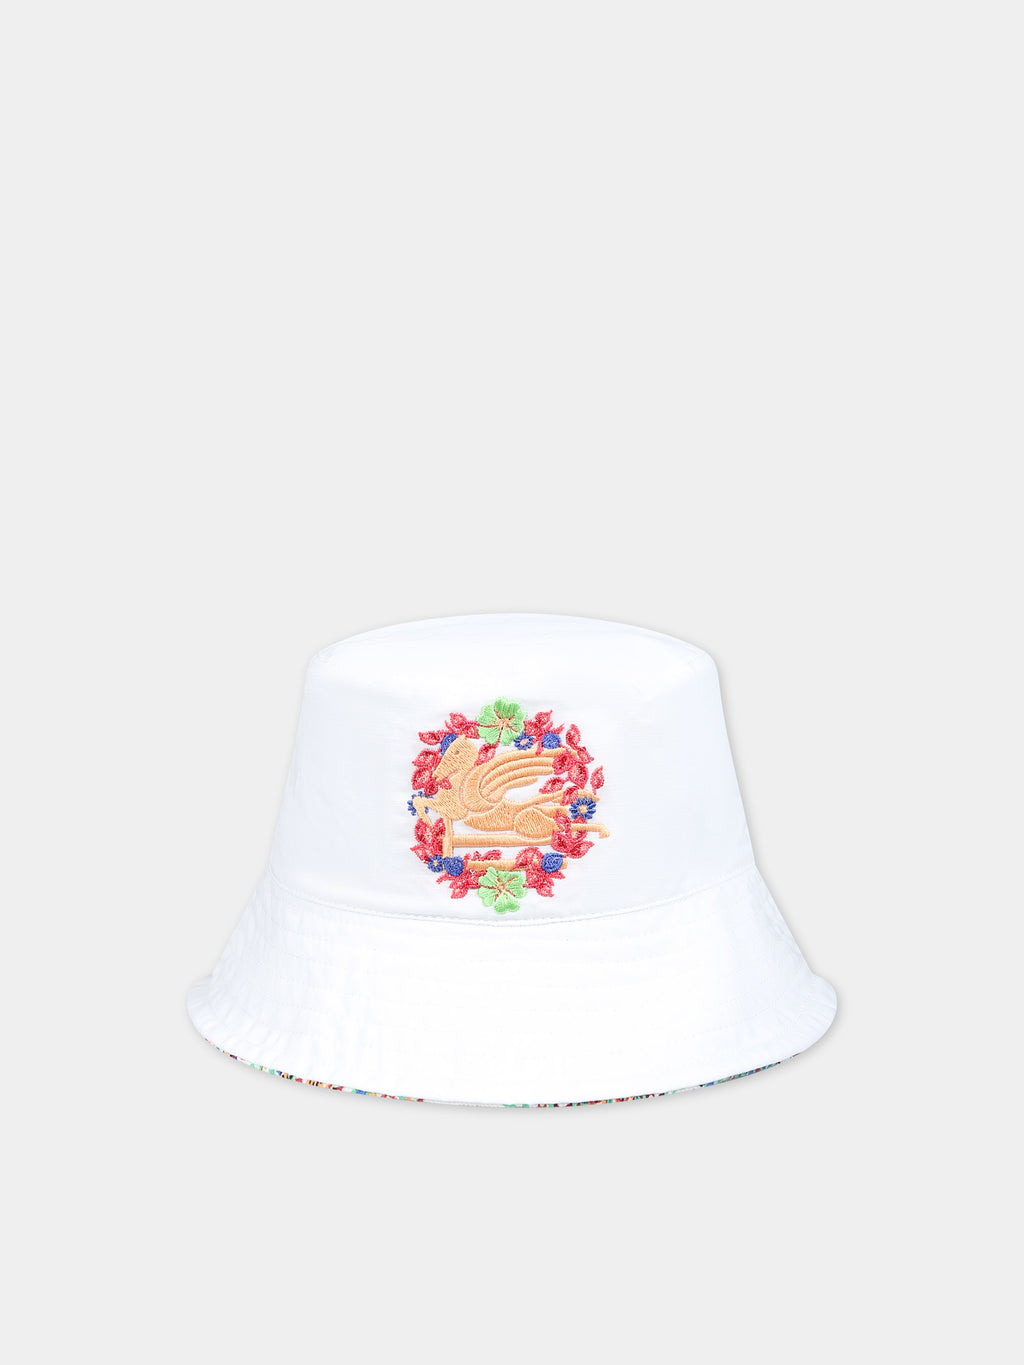 Reversible white cloche for kids with logo and paisley pattern